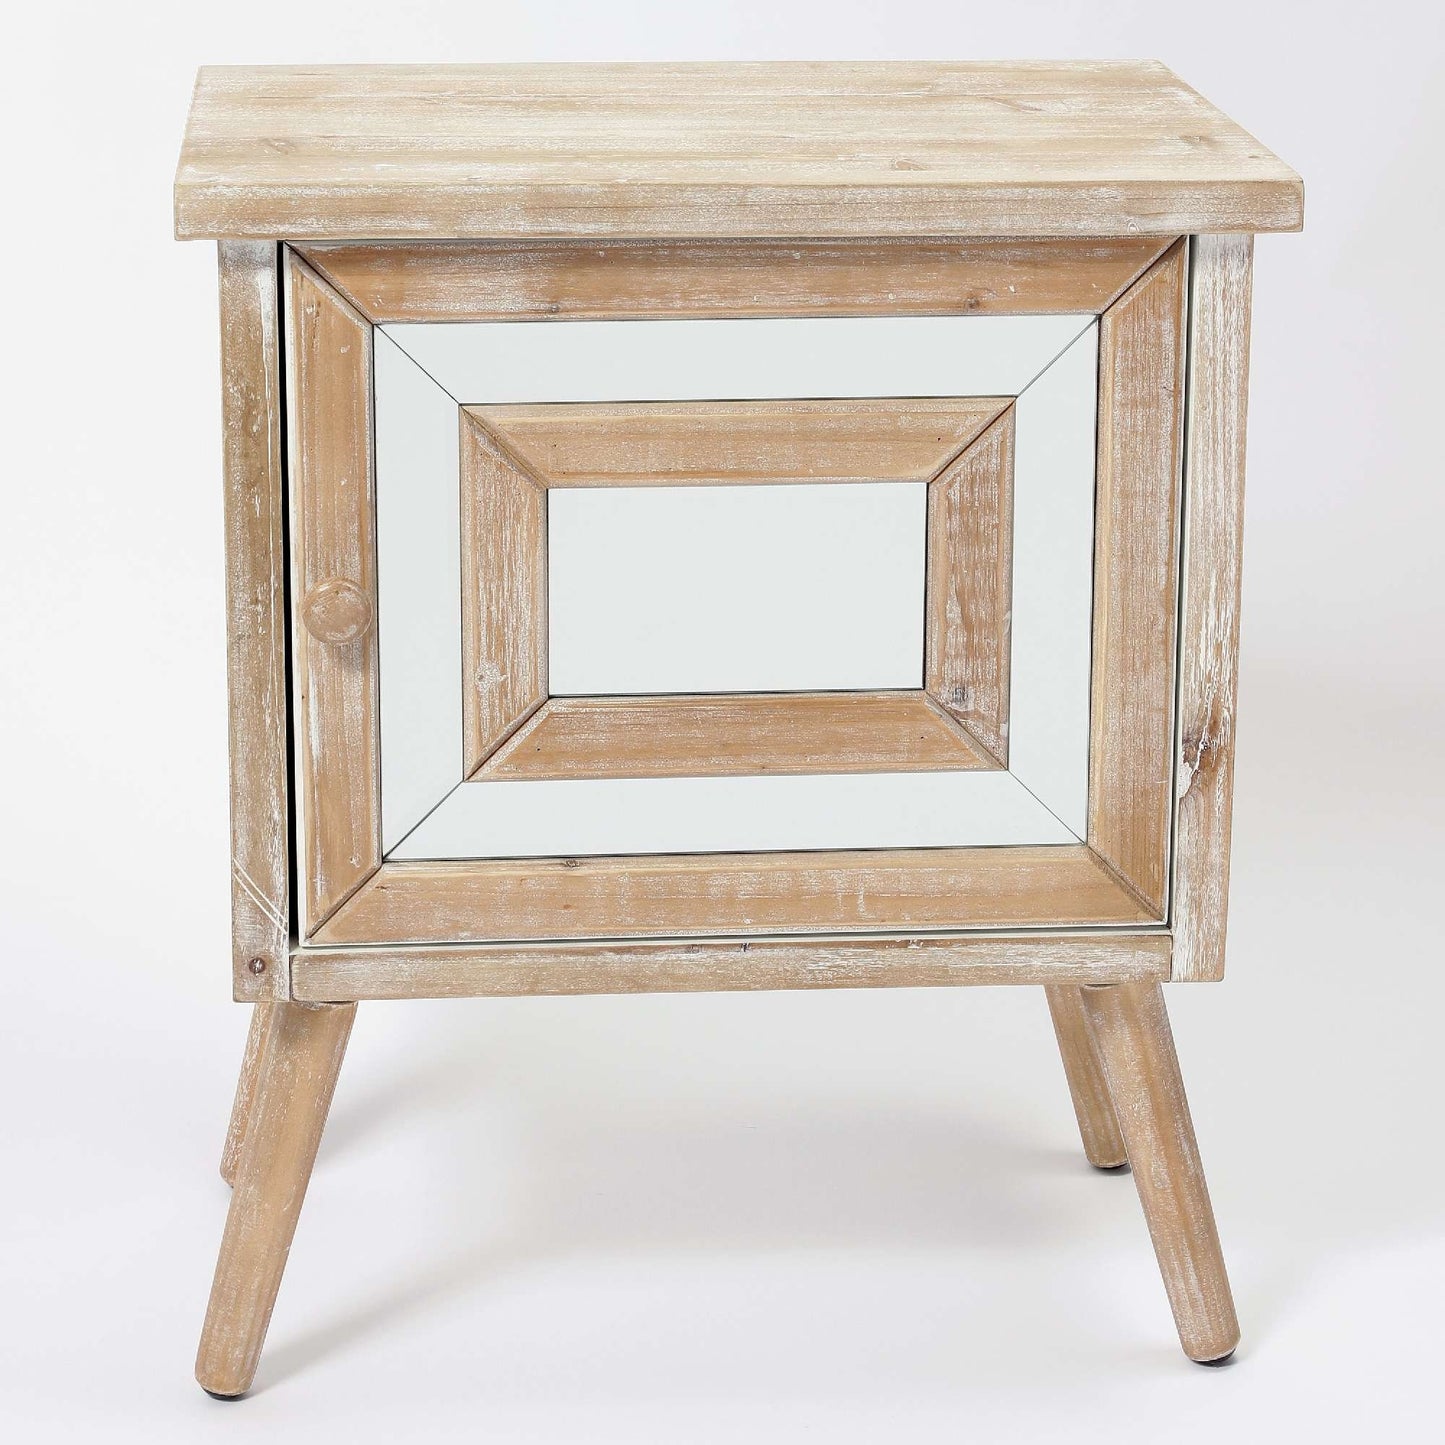 Washed oak and mirror bedside table